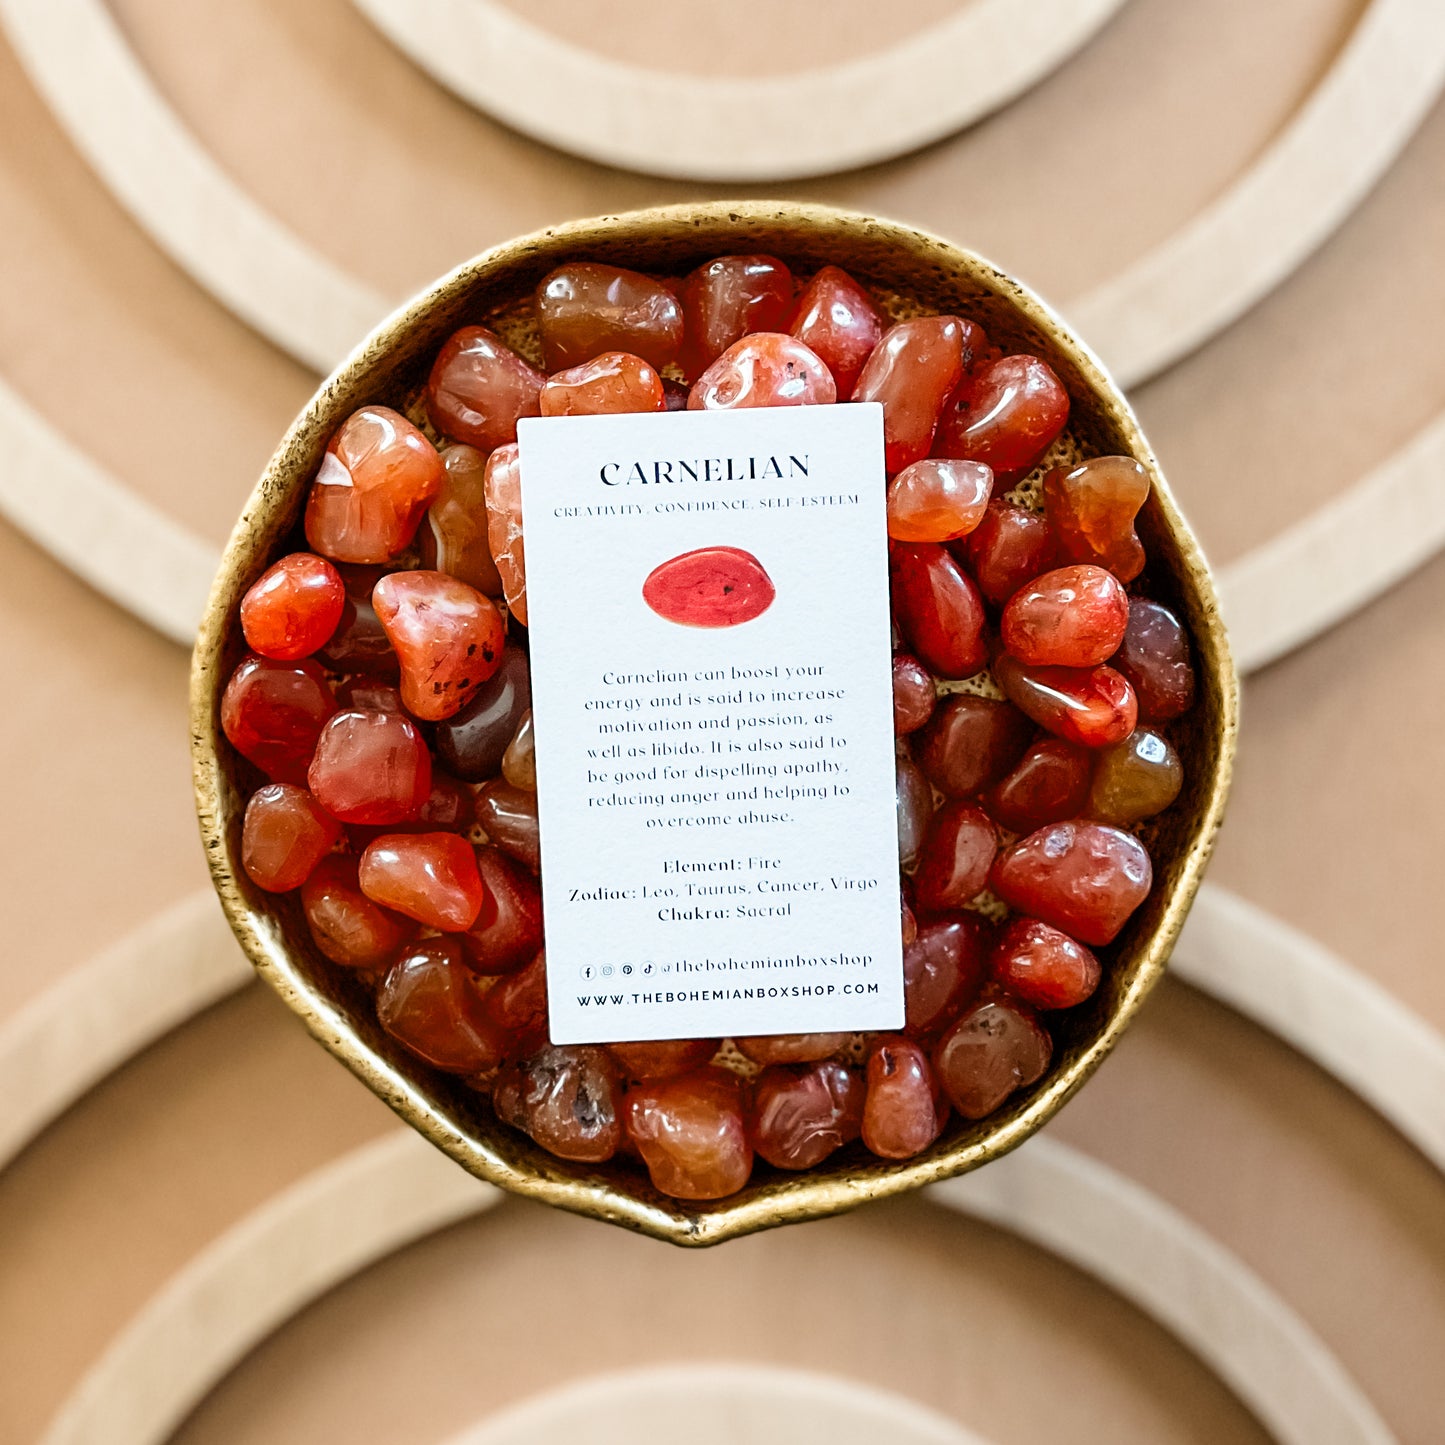 Carnelian Tumbled Stone with complementary keepsake information card